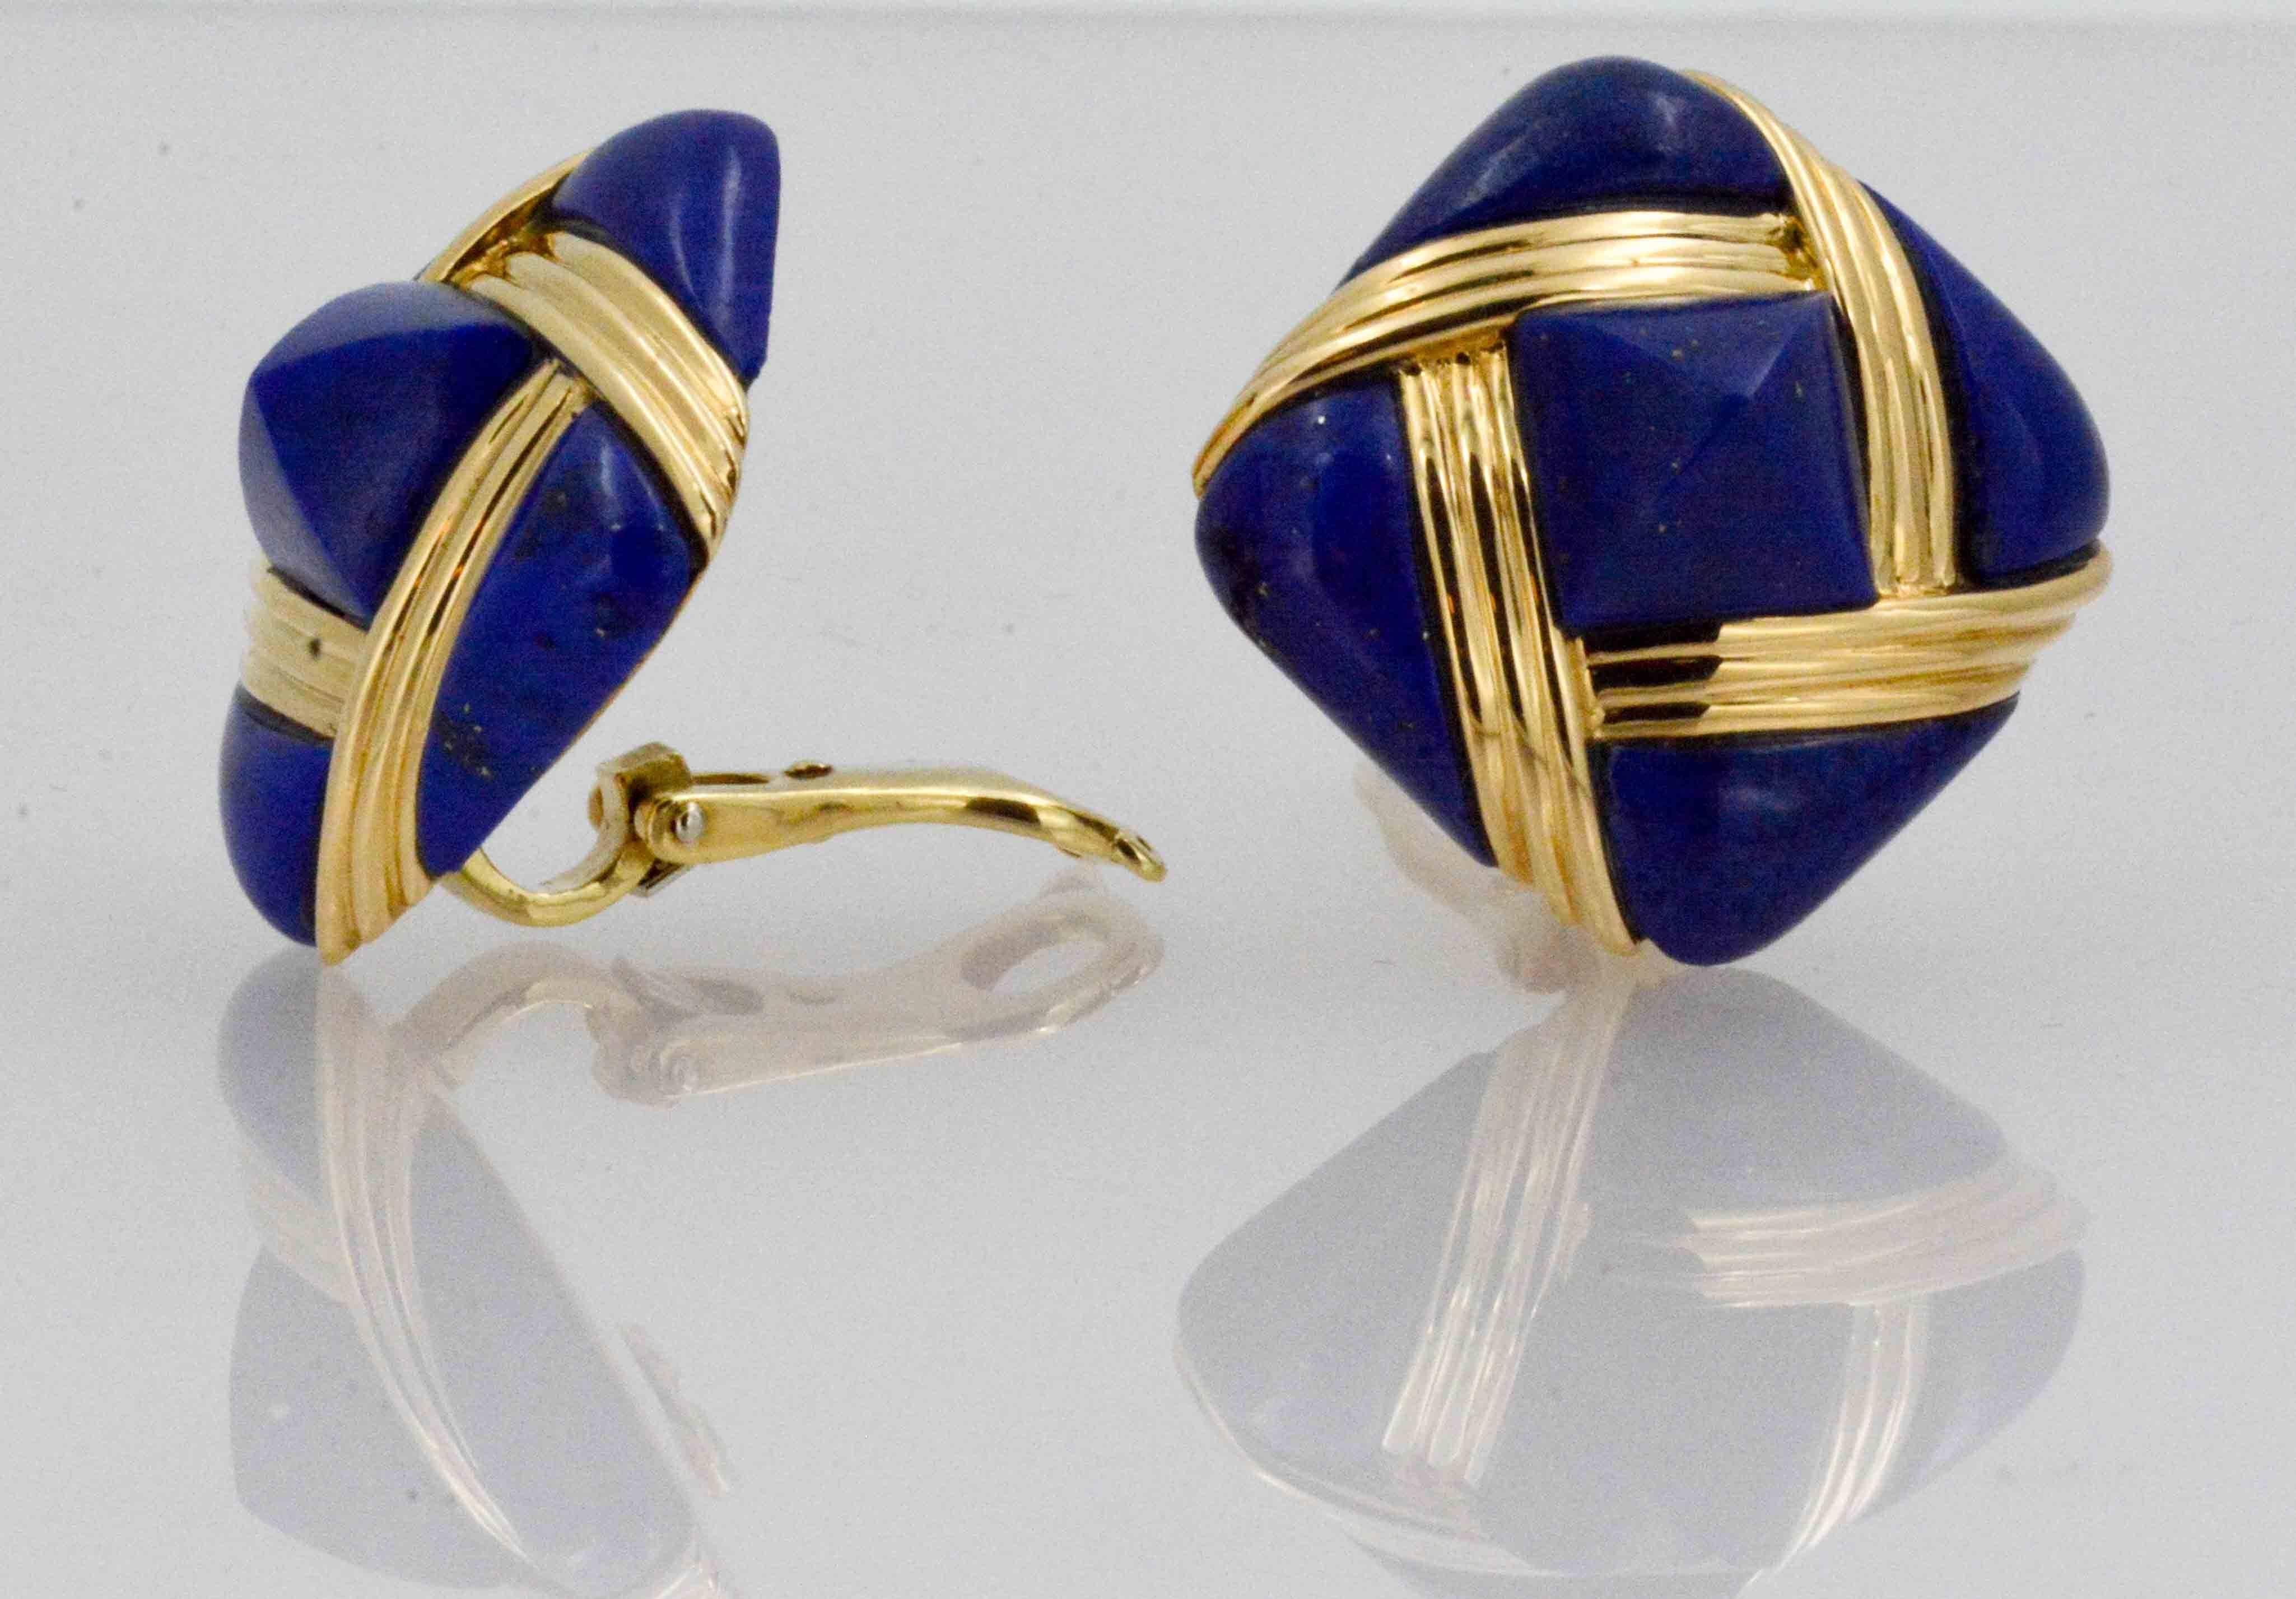 Classically elegant clip on earrings with a contemporary angle are crafted in 18 karat yellow gold. The versatile pattern play of the 18 karat yellow gold complements the striking blue Lapis Lazuli in these 1980's clip on earrings.